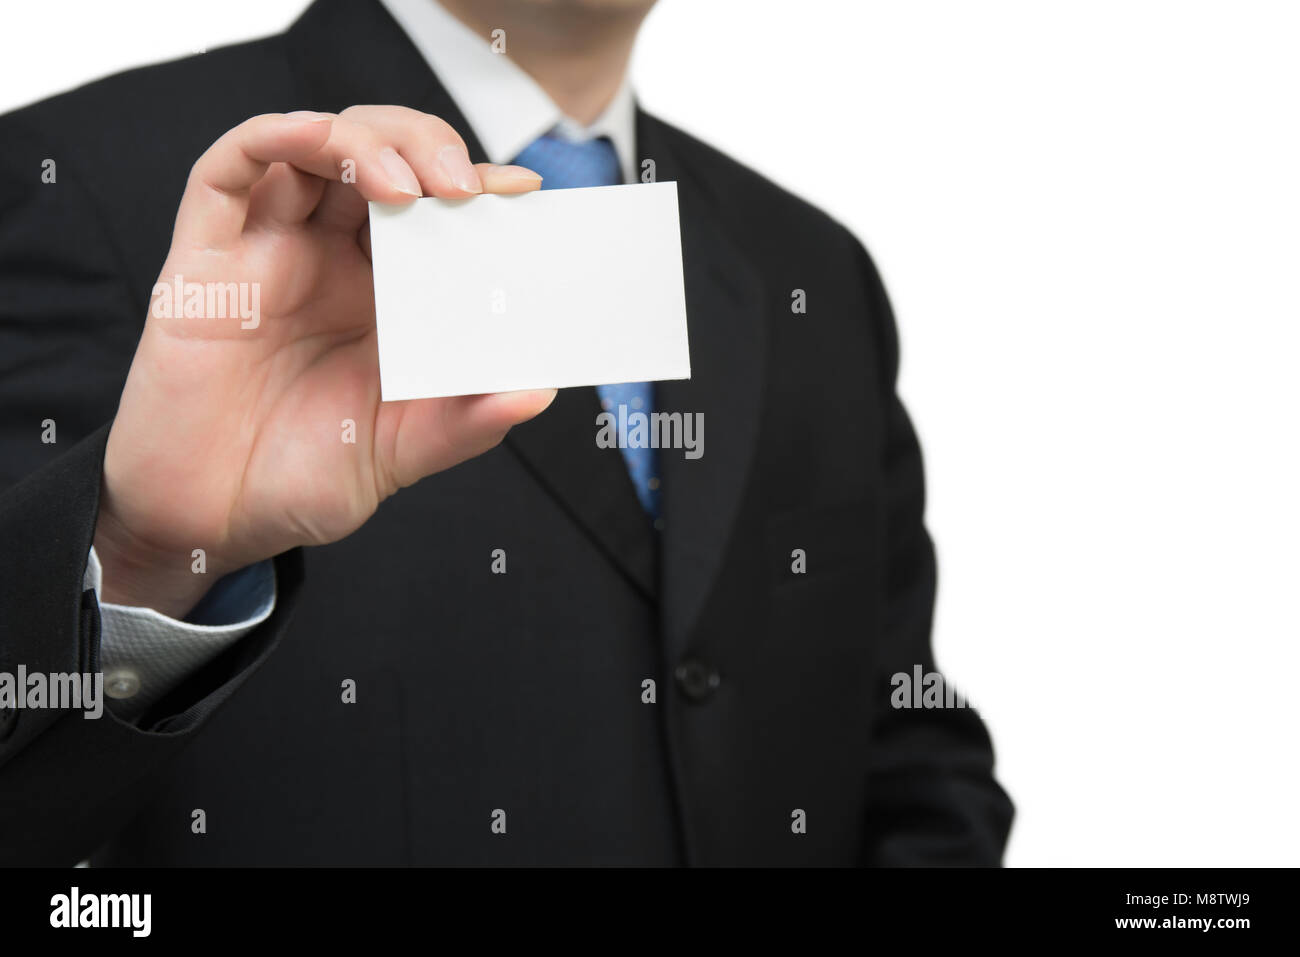 Man's hand showing business card - closeup shot on white background. Stock Photo